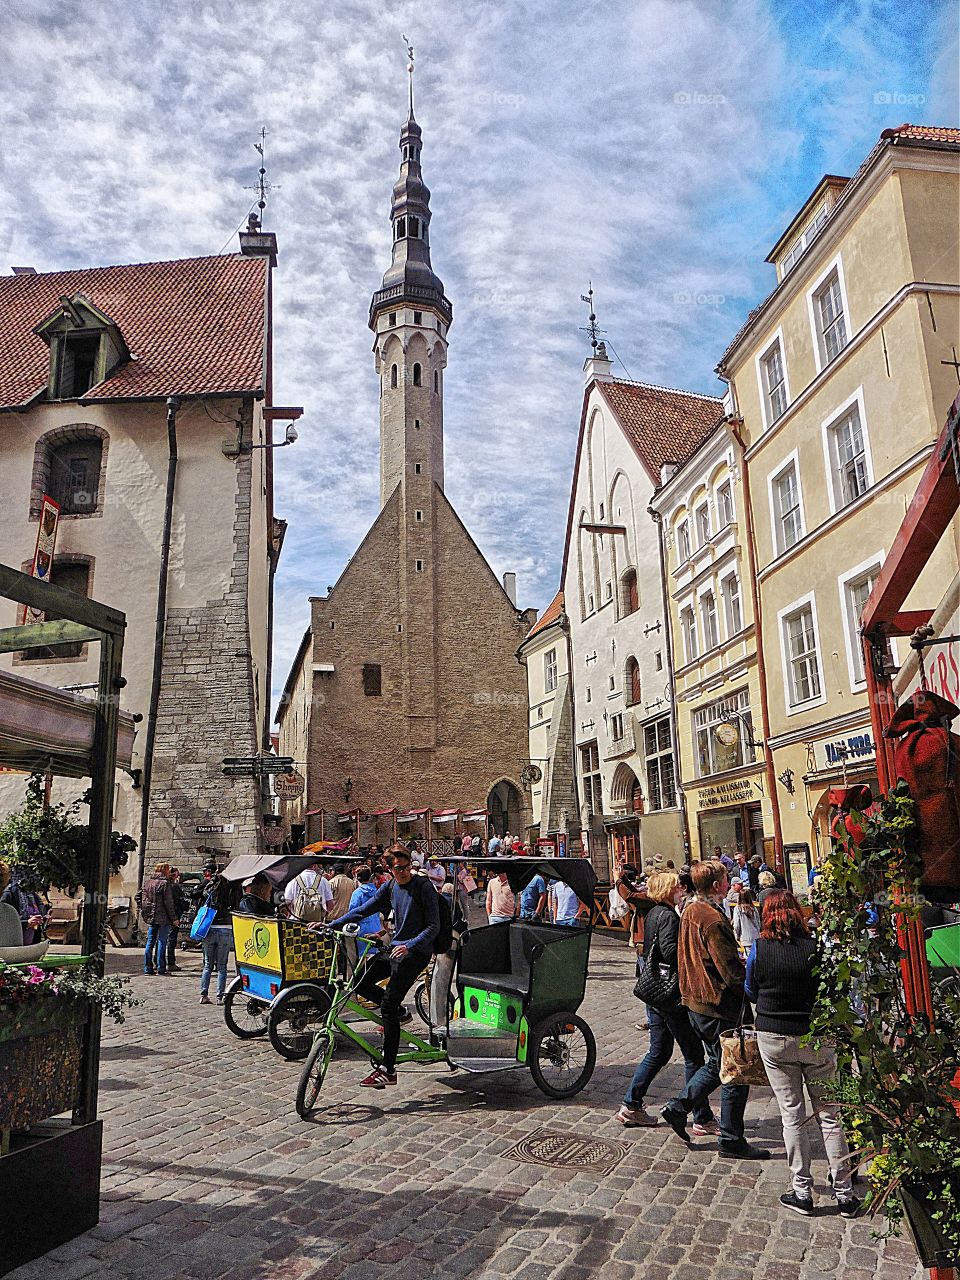 Tallinn, Estonia’s capital on the Baltic Sea, is the country’s cultural hub. It retains its walled, cobblestoned Old Town, home to cafes and shops, as well as Kiek in de Kök, a 15th-century defensive tower. 